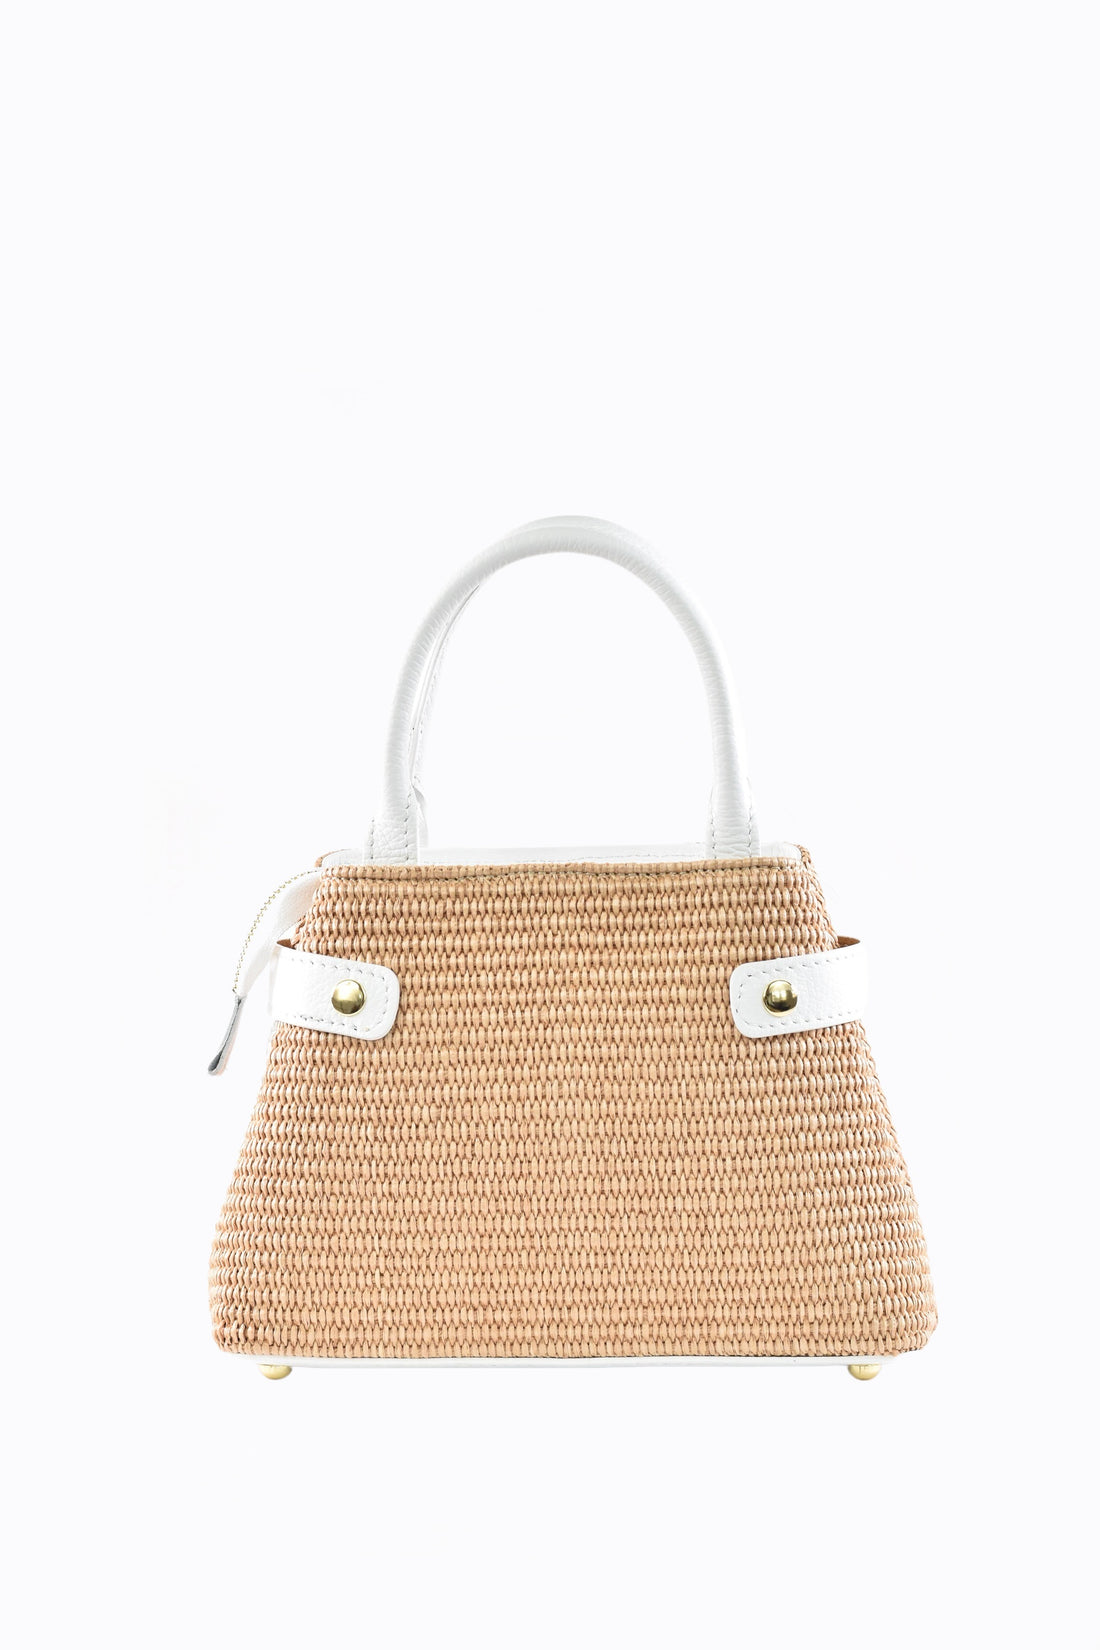 Bamboo Babe bag in Beige Dollar leather